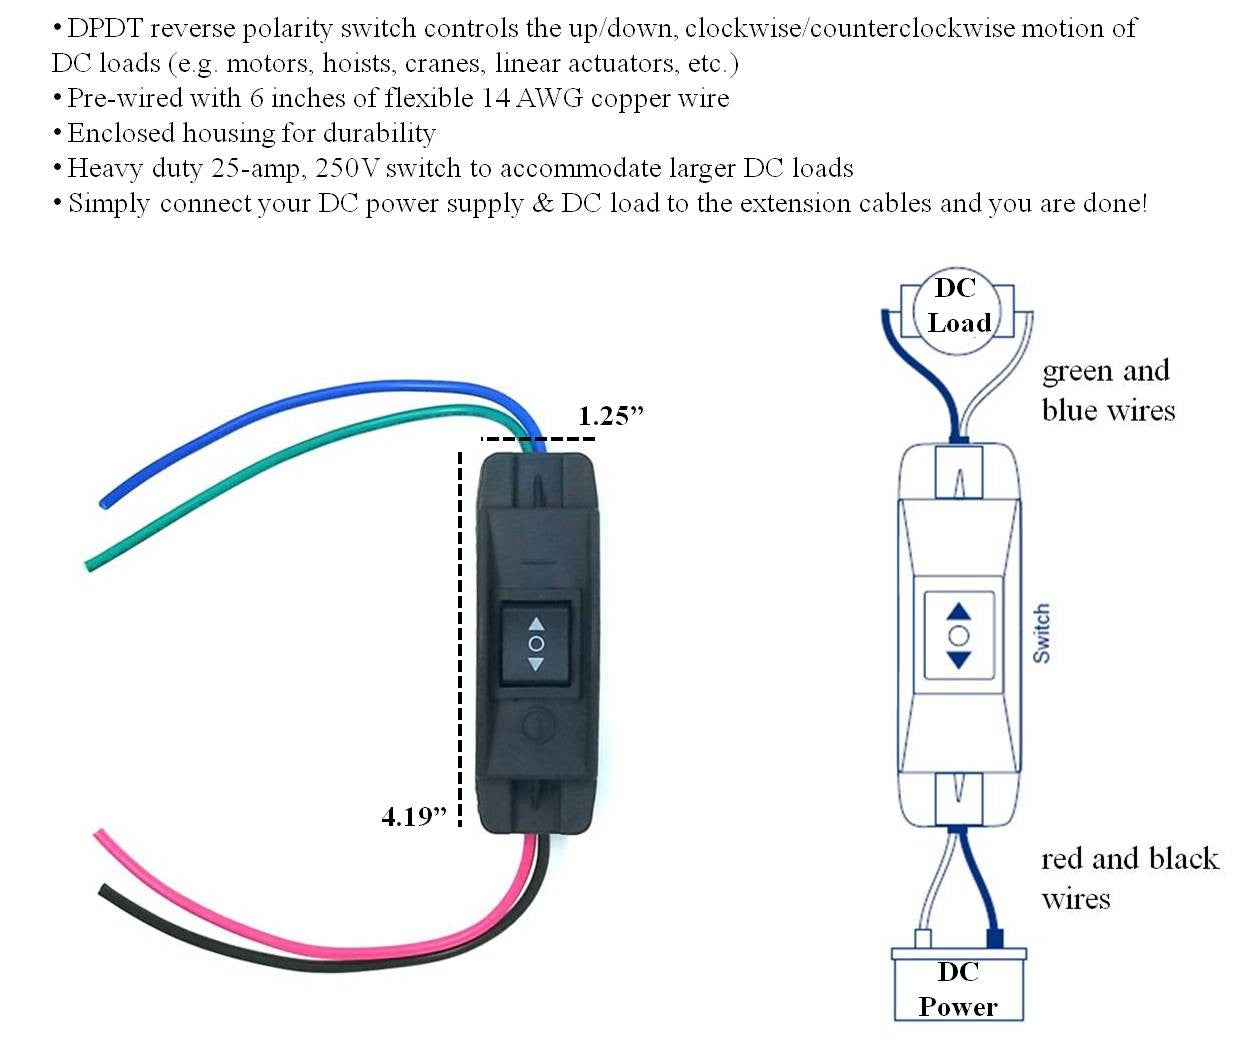 25A DPDT Forward Reverse Up Down Reverse Polarity Switch